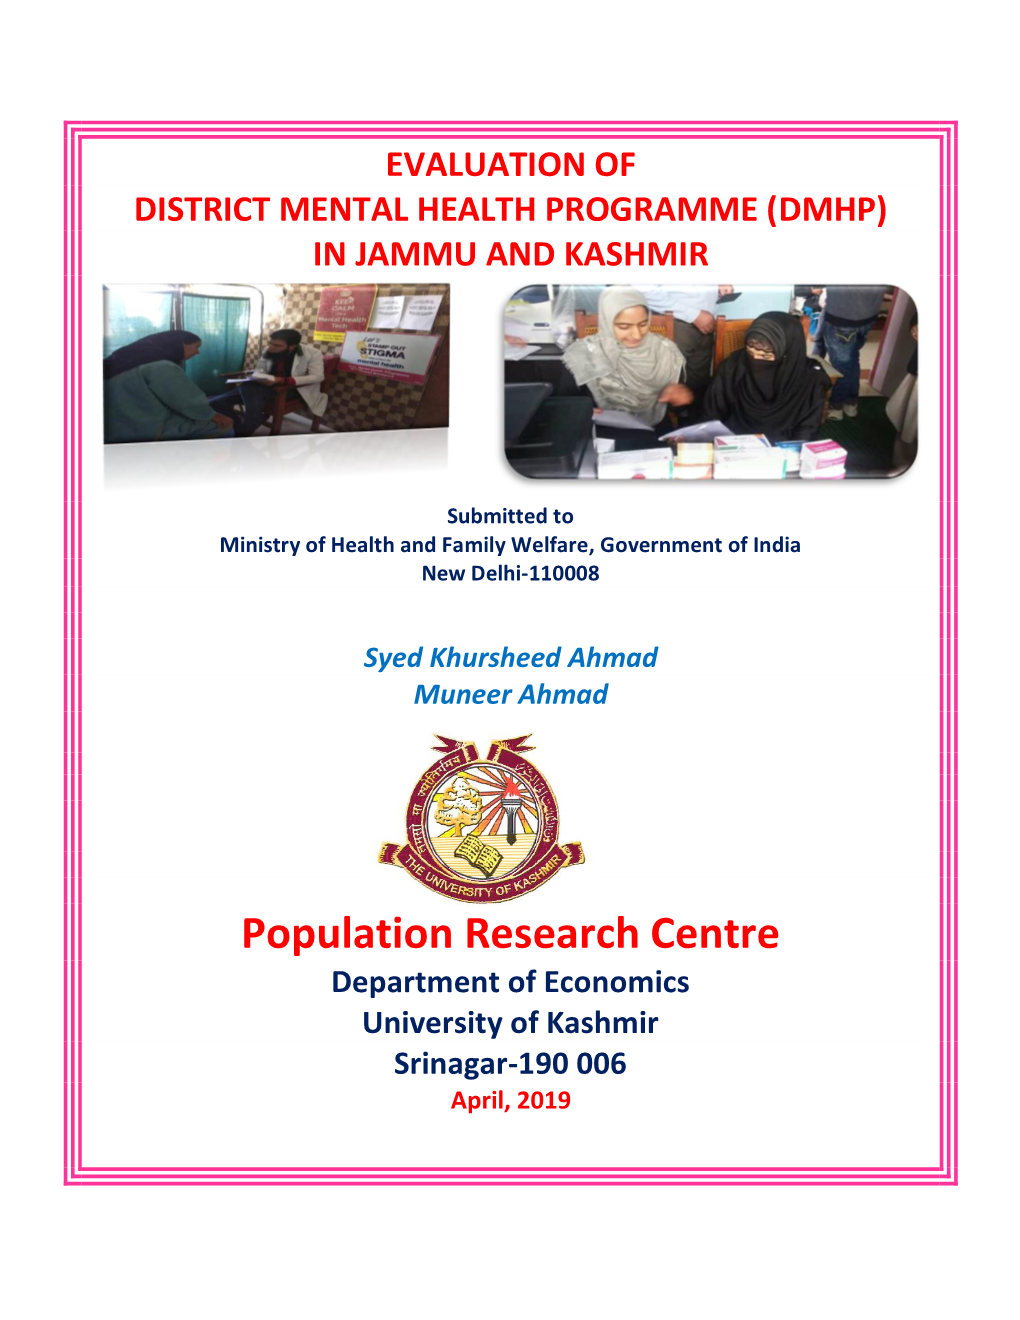 Evaluation of District Mental Health Programme (Dmhp) in Jammu and Kashmir